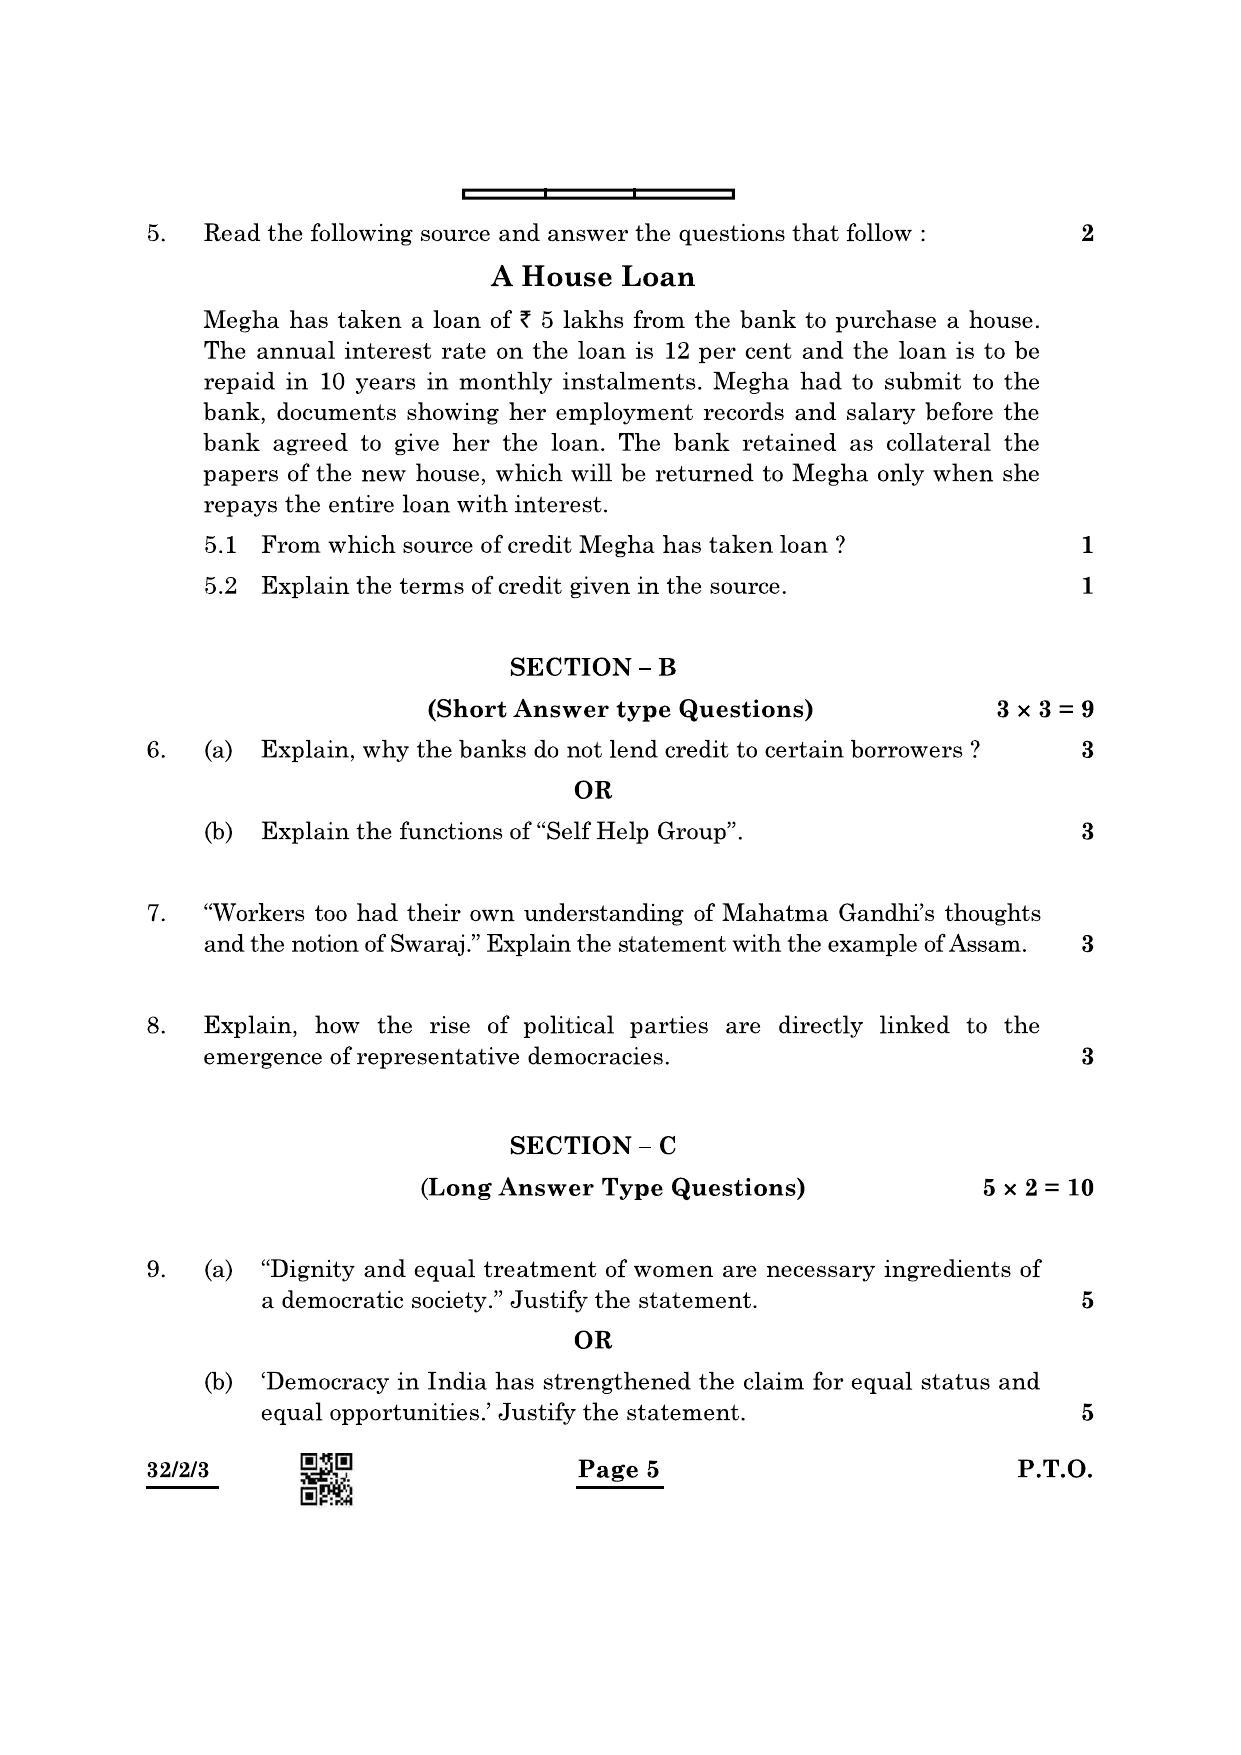 CBSE Class 10 32-2-3 Social Science 2022 Question Paper - Page 5